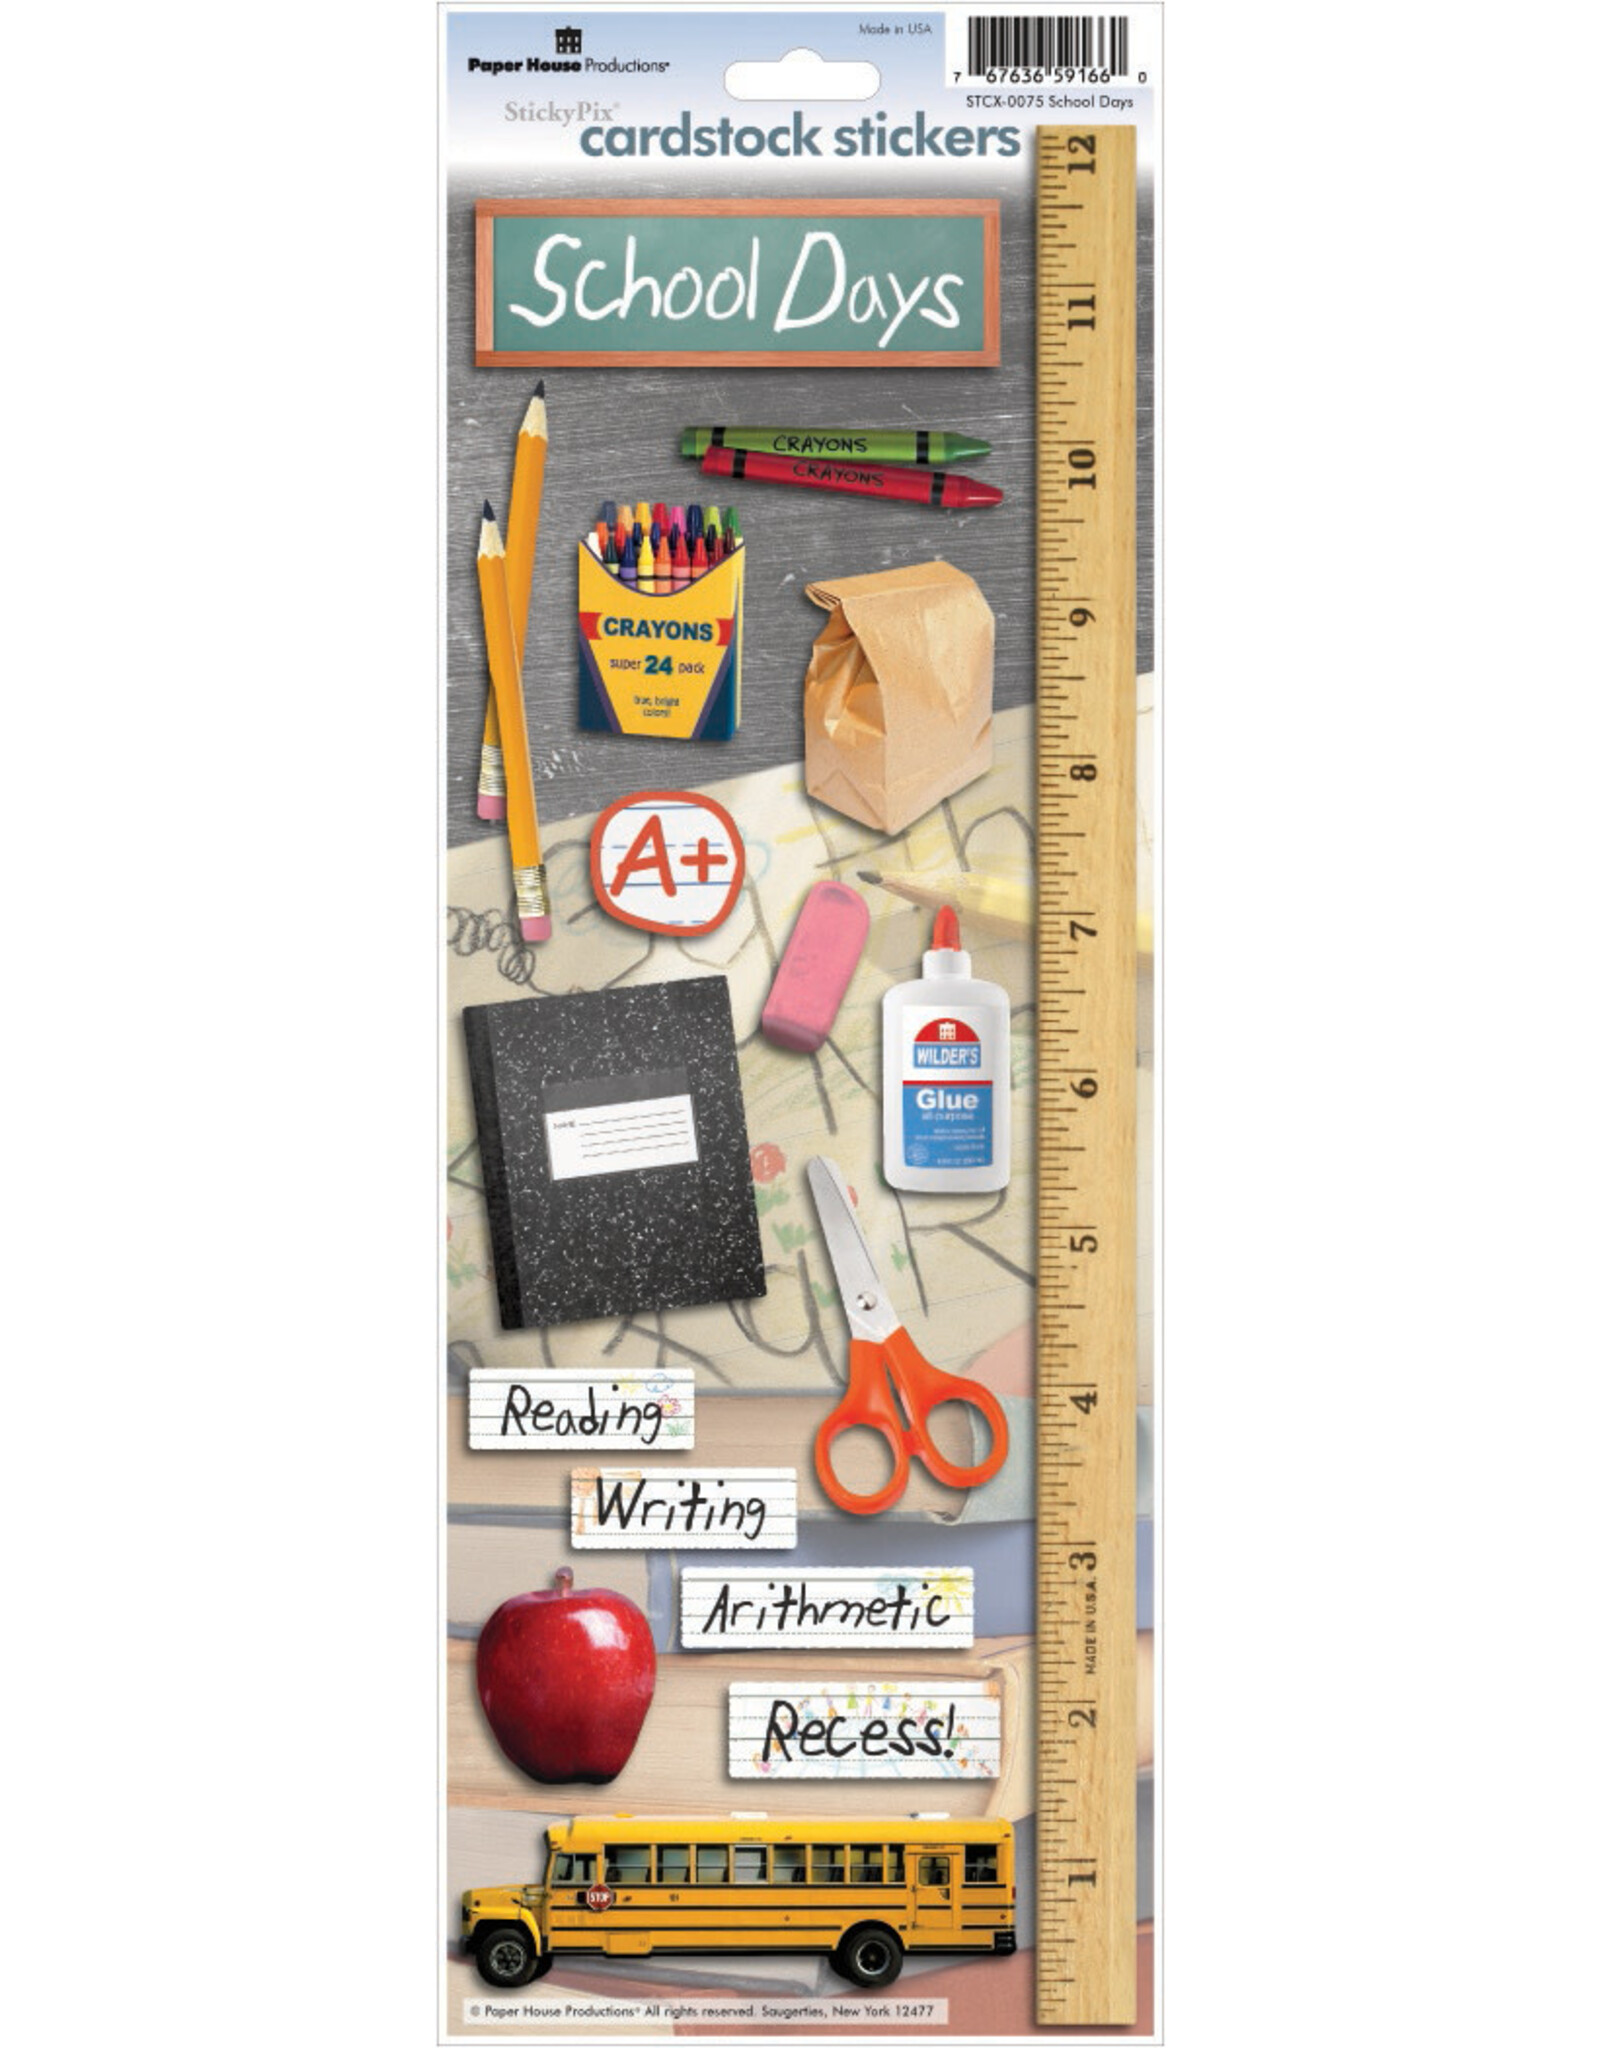 PAPER HOUSE PRODUCTIONS PAPER HOUSE SCHOOL DAYS CARDSTOCK STICKERS